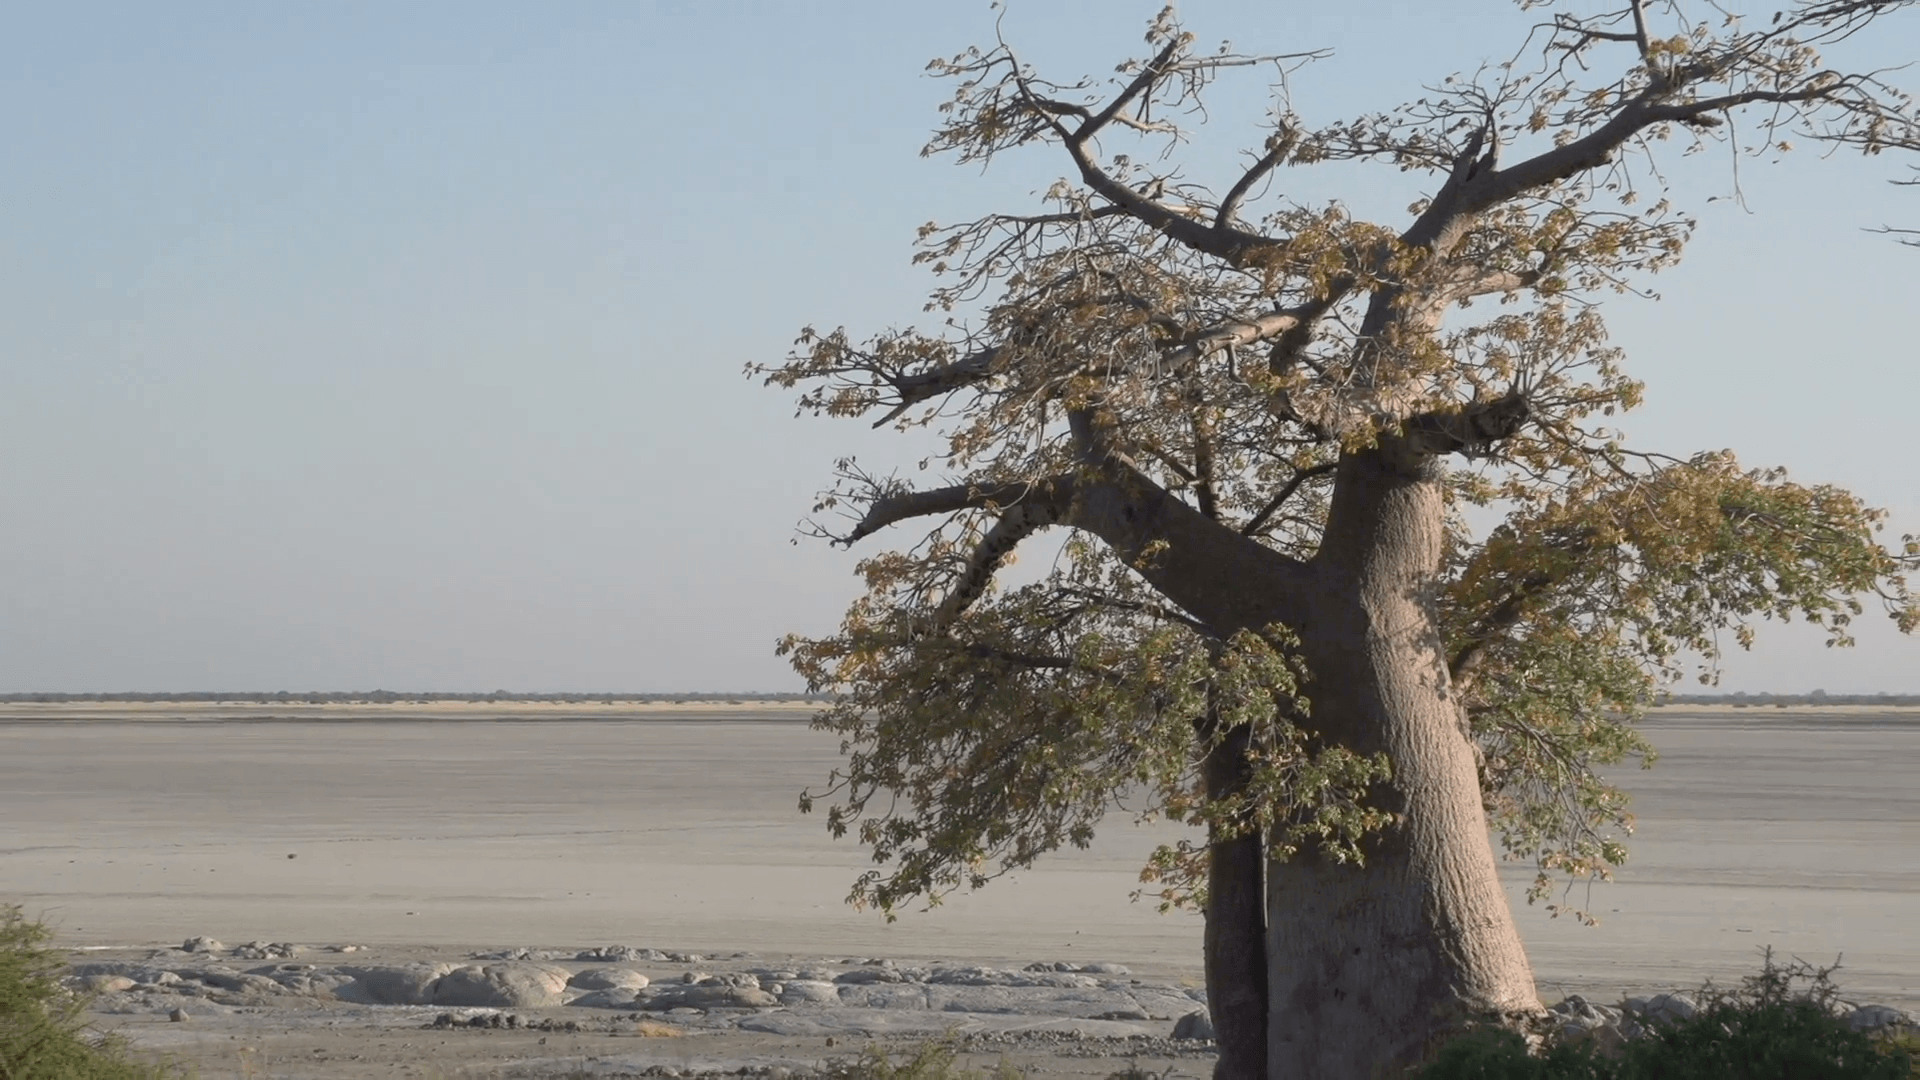 Zoom out on Baobab trees with Makgadikgadi Pans in the background